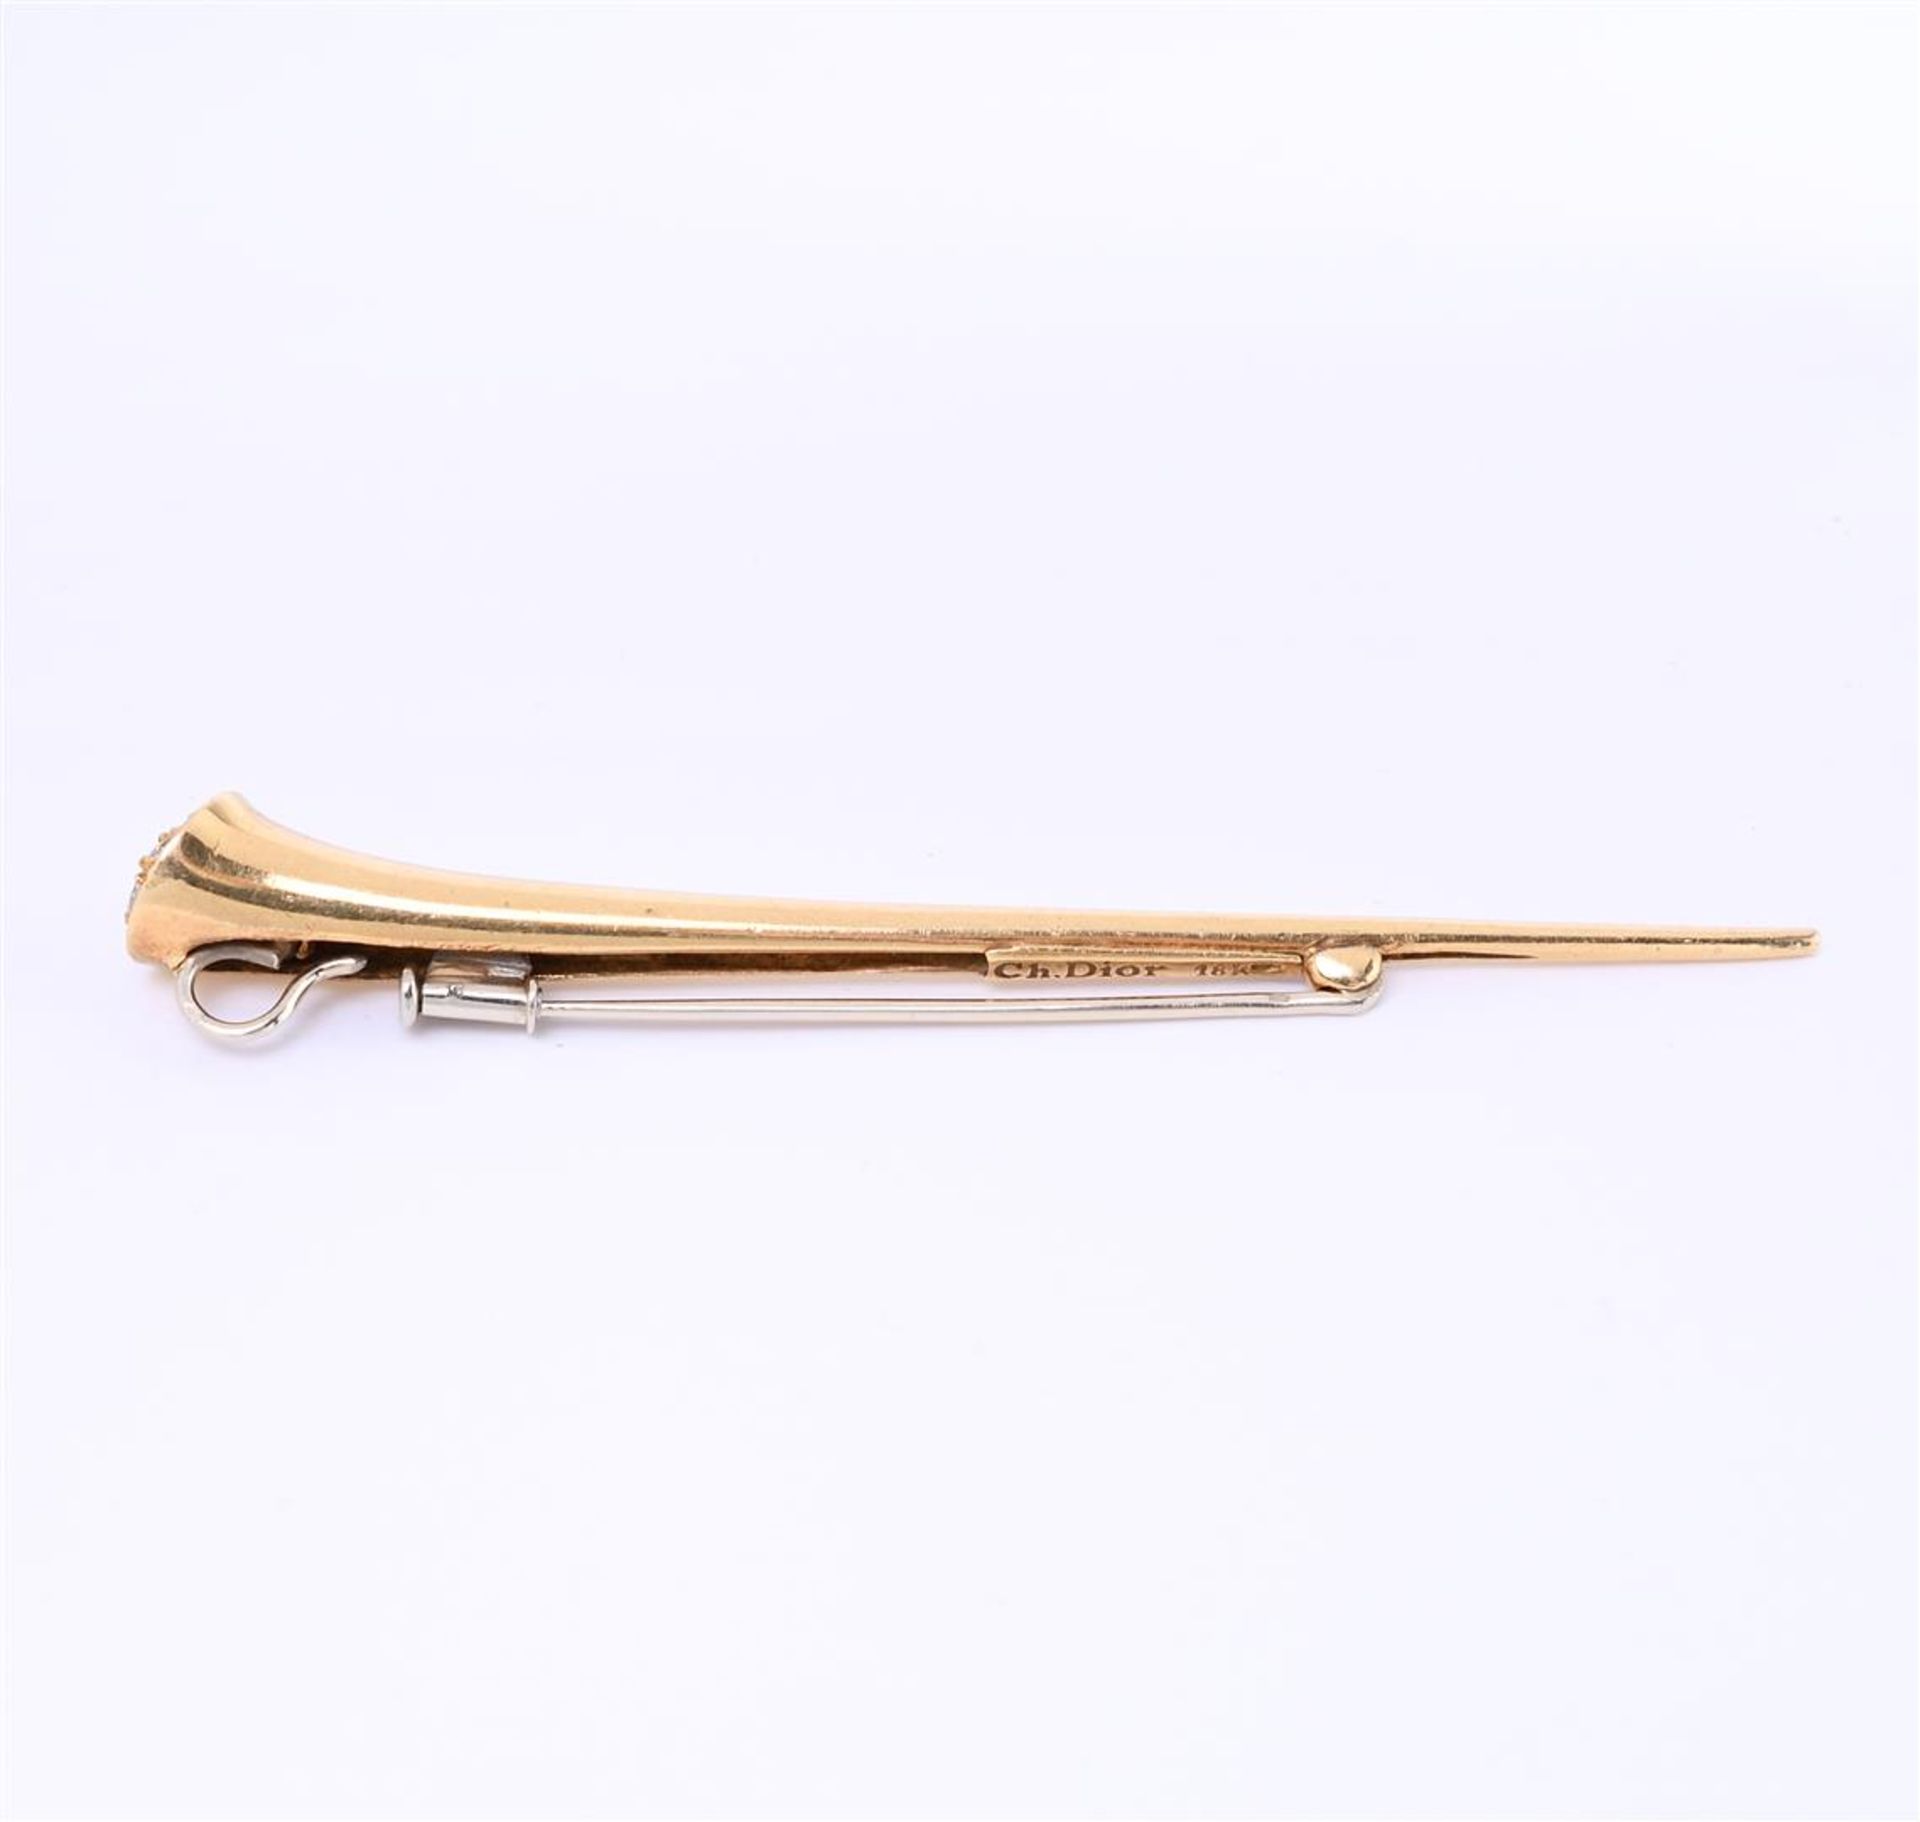 18kt yellow gold brooch from the Christian Dior brand, set with 7 brilliants - Image 3 of 5